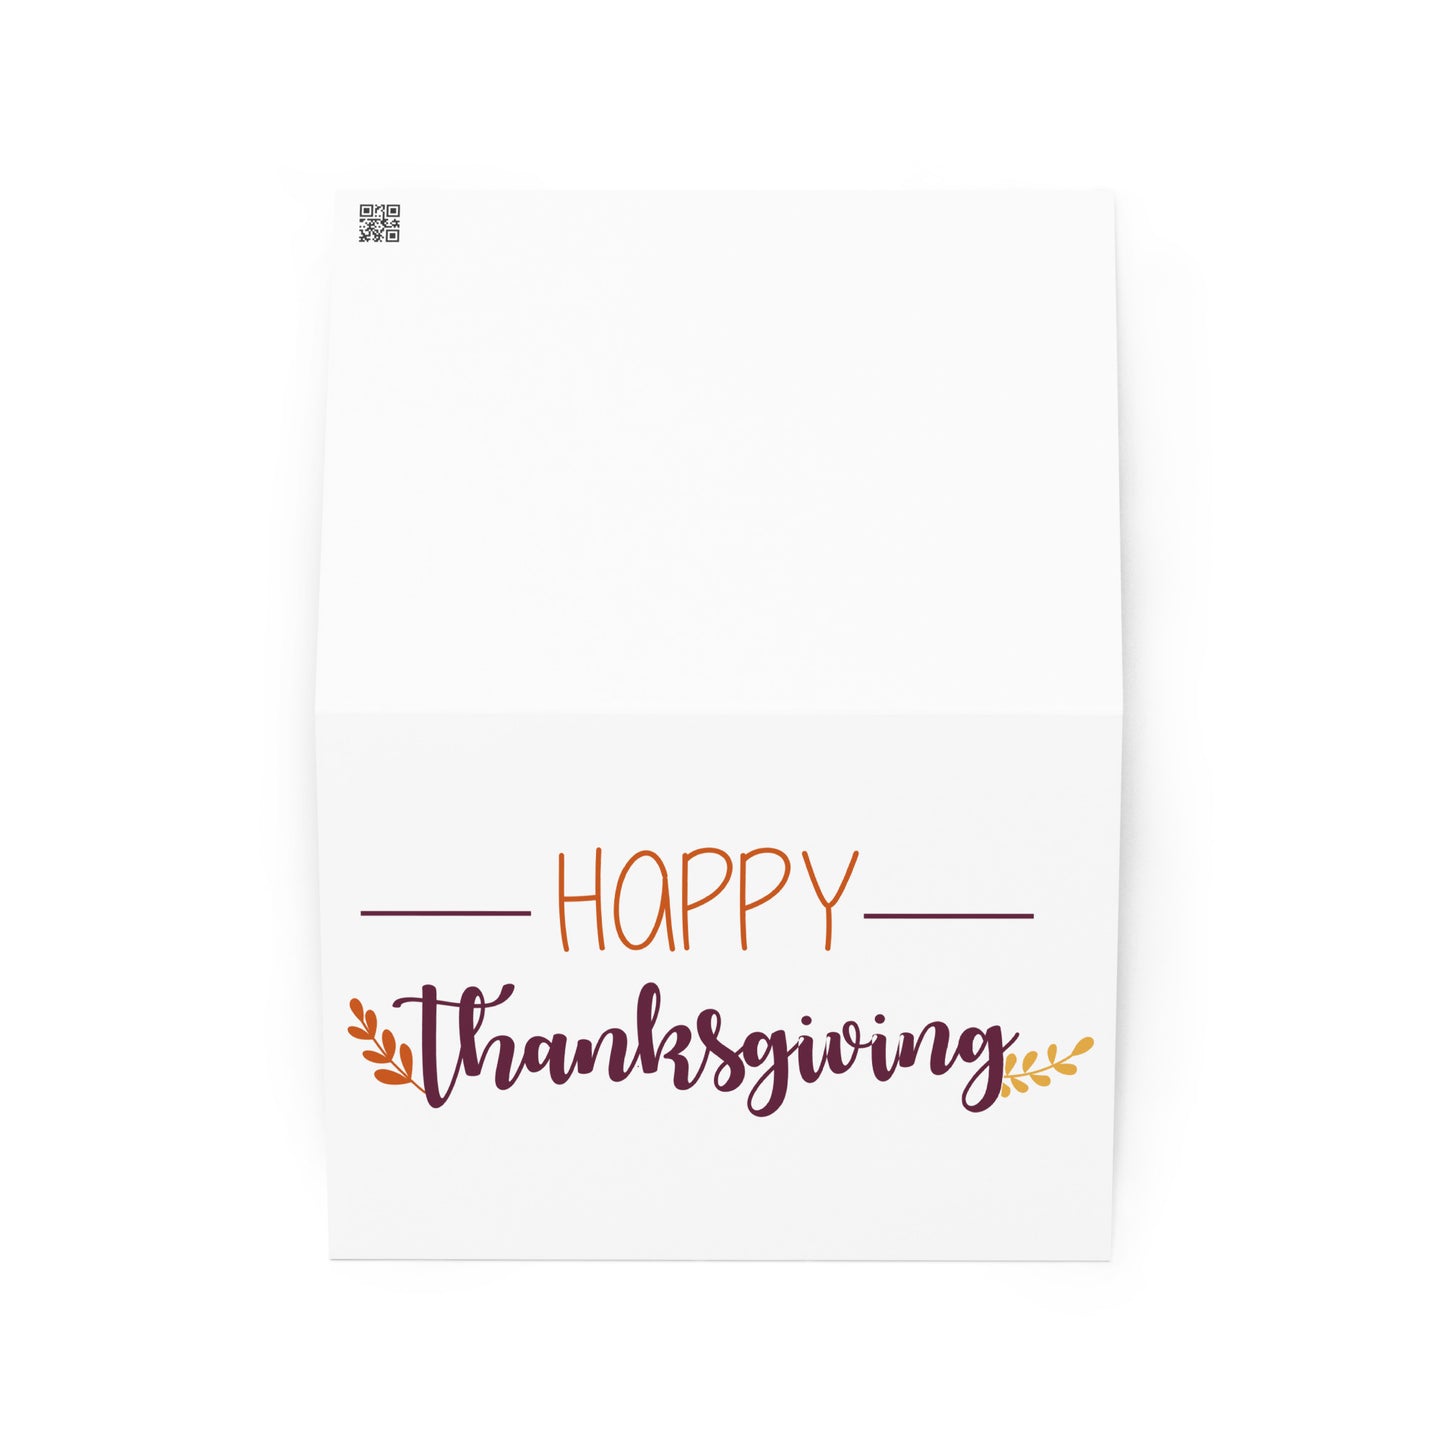 Happy Thanksgiving Greeting card